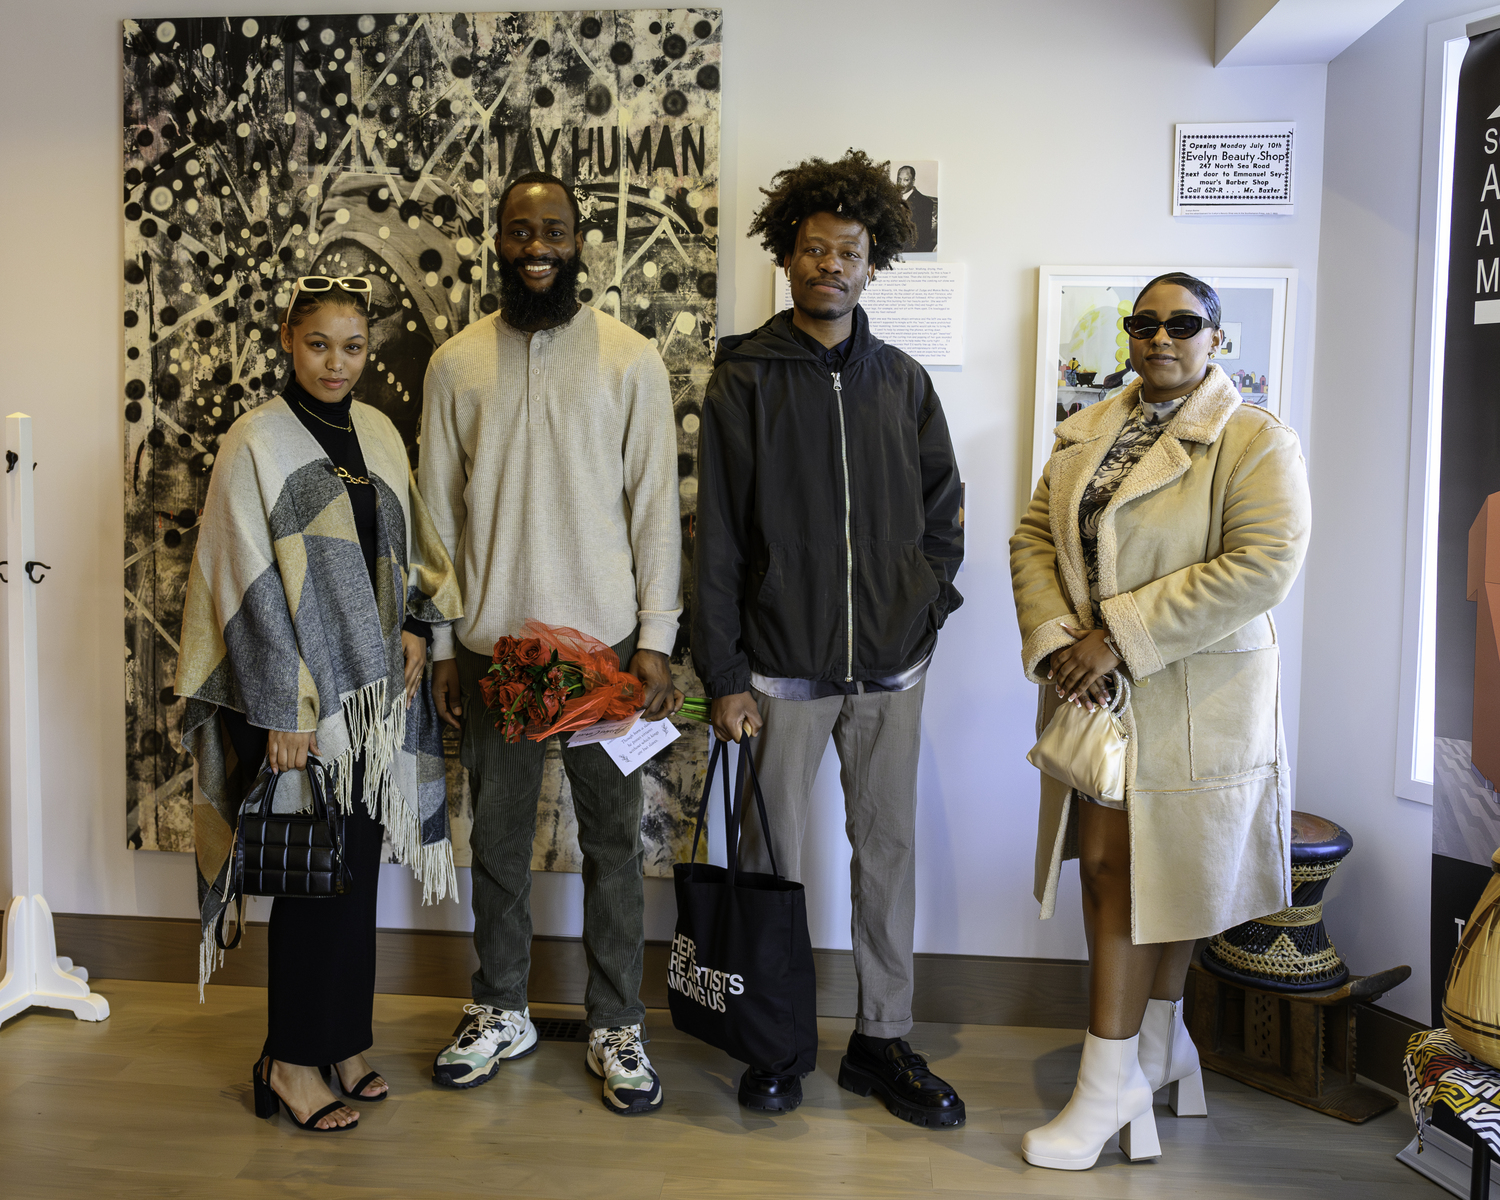 Chloe Brown, Mayowa Nwadike, Naderson Saint-Pierre and Ulreeze Jacobs on January 13, at the opening of the 